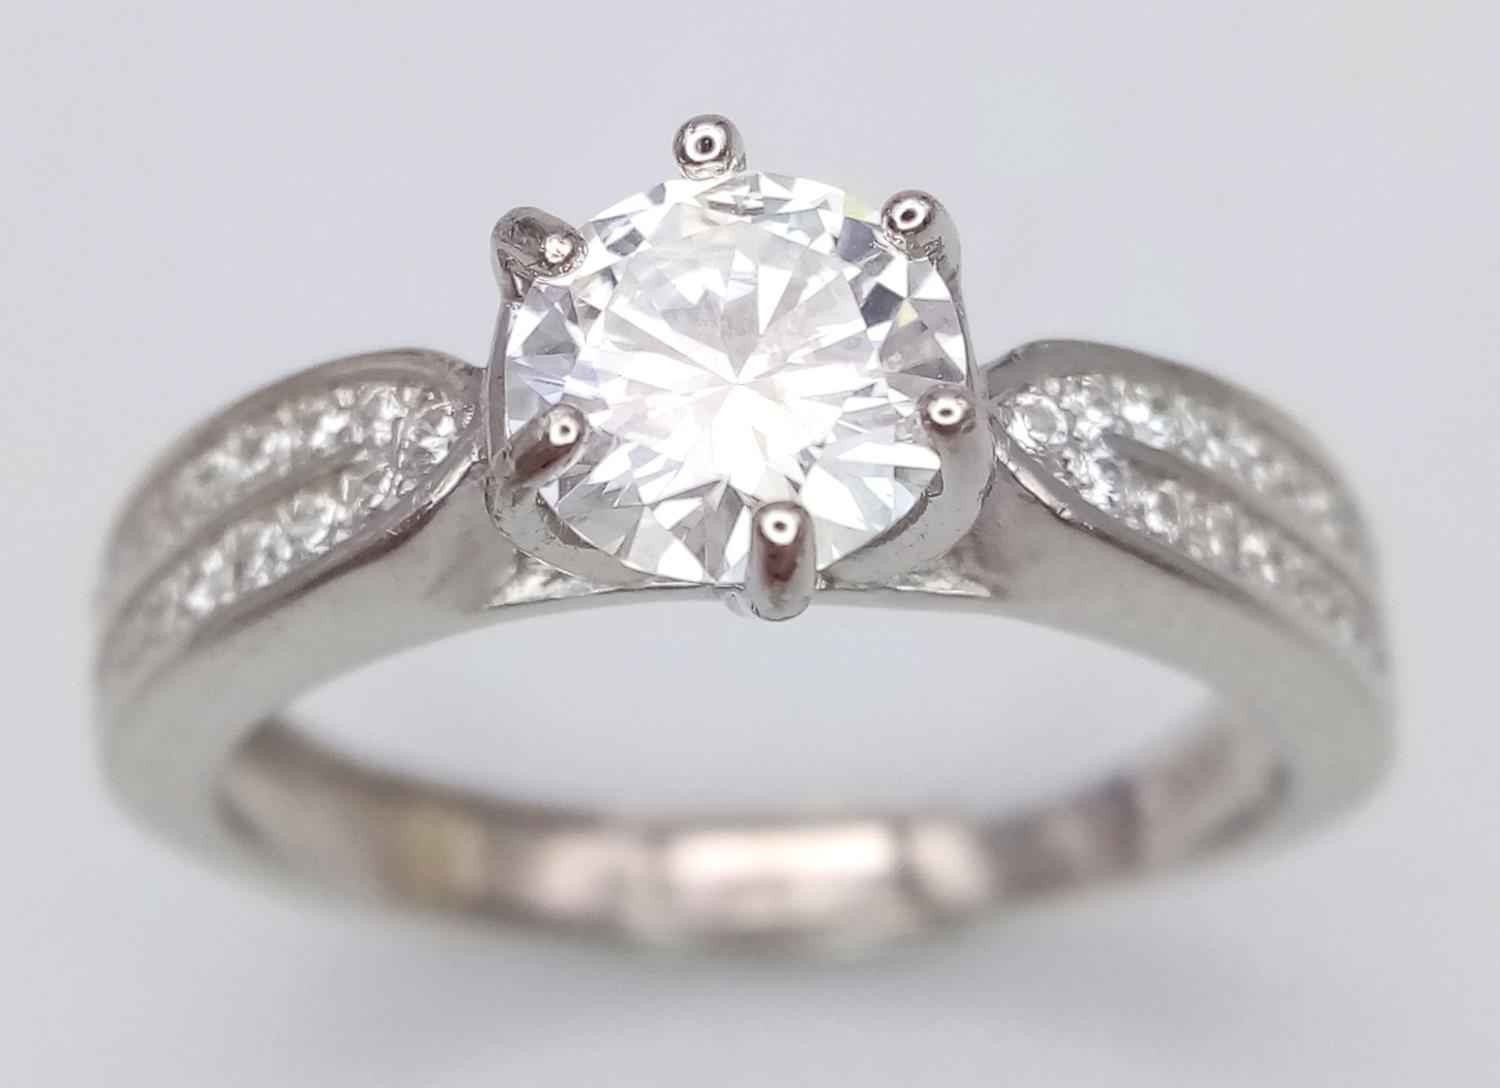 A 1ct Moissanite 925 Silver Ring. Size O. Comes with a GRA certificate.